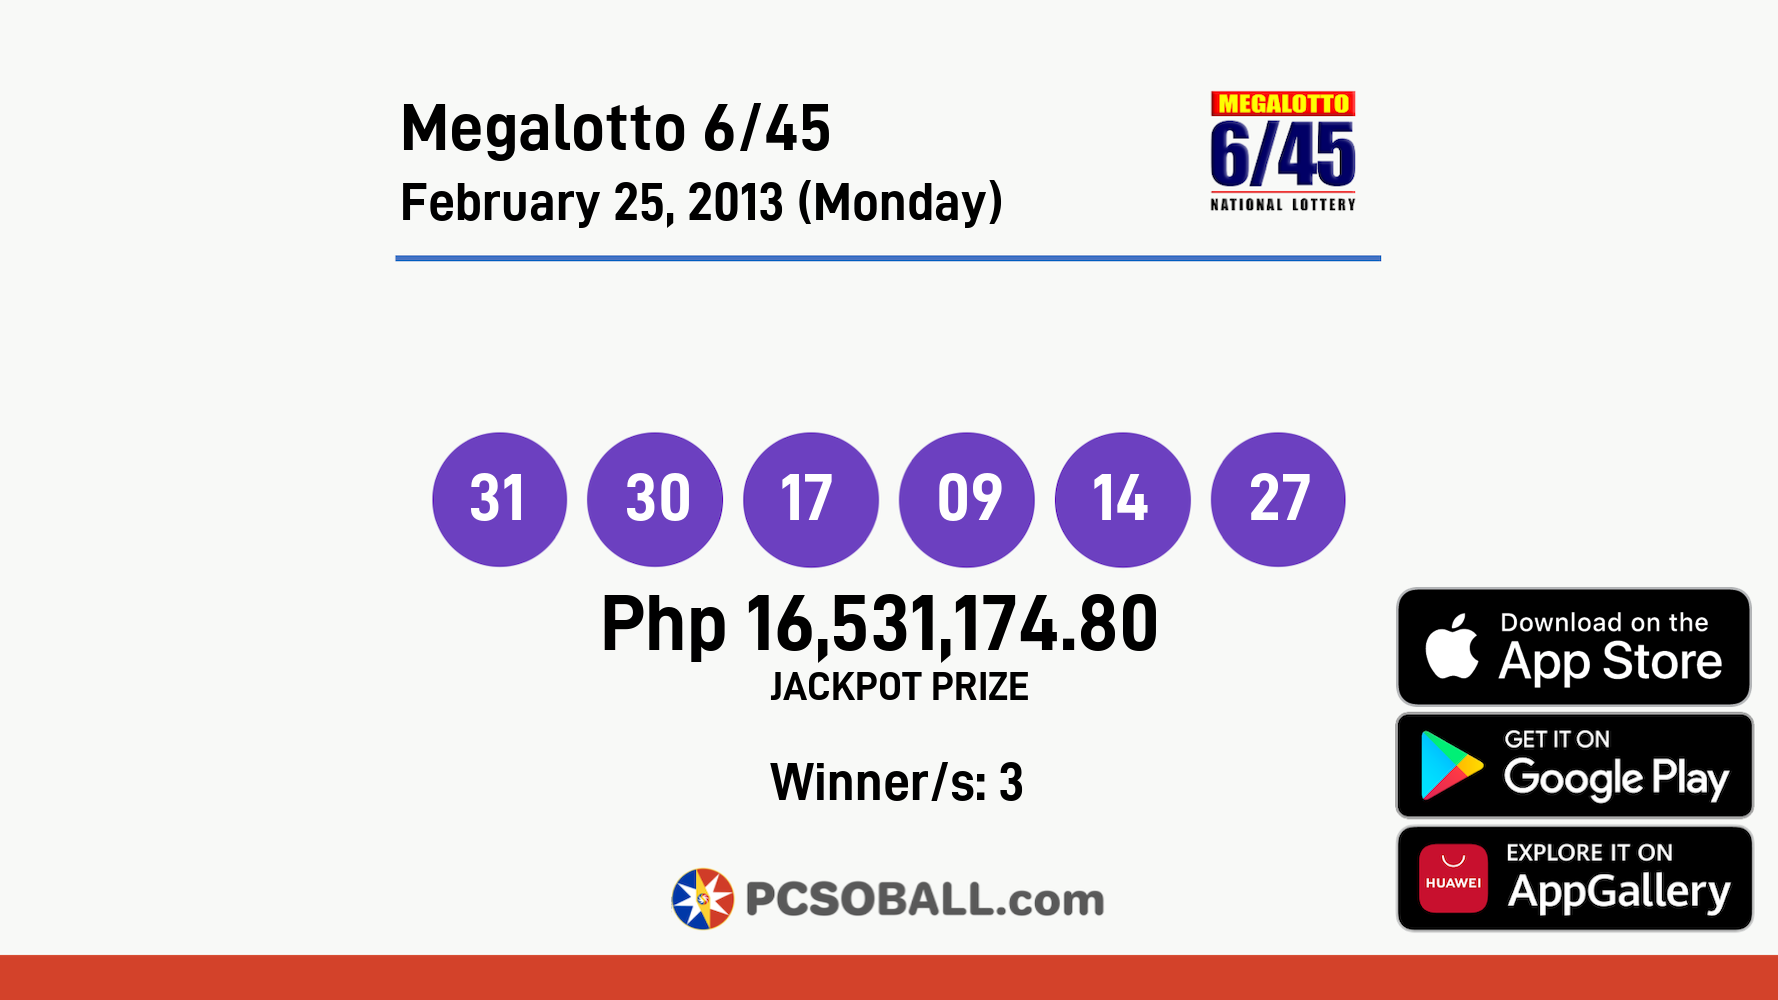 Megalotto 6/45 February 25, 2013 (Monday) Result